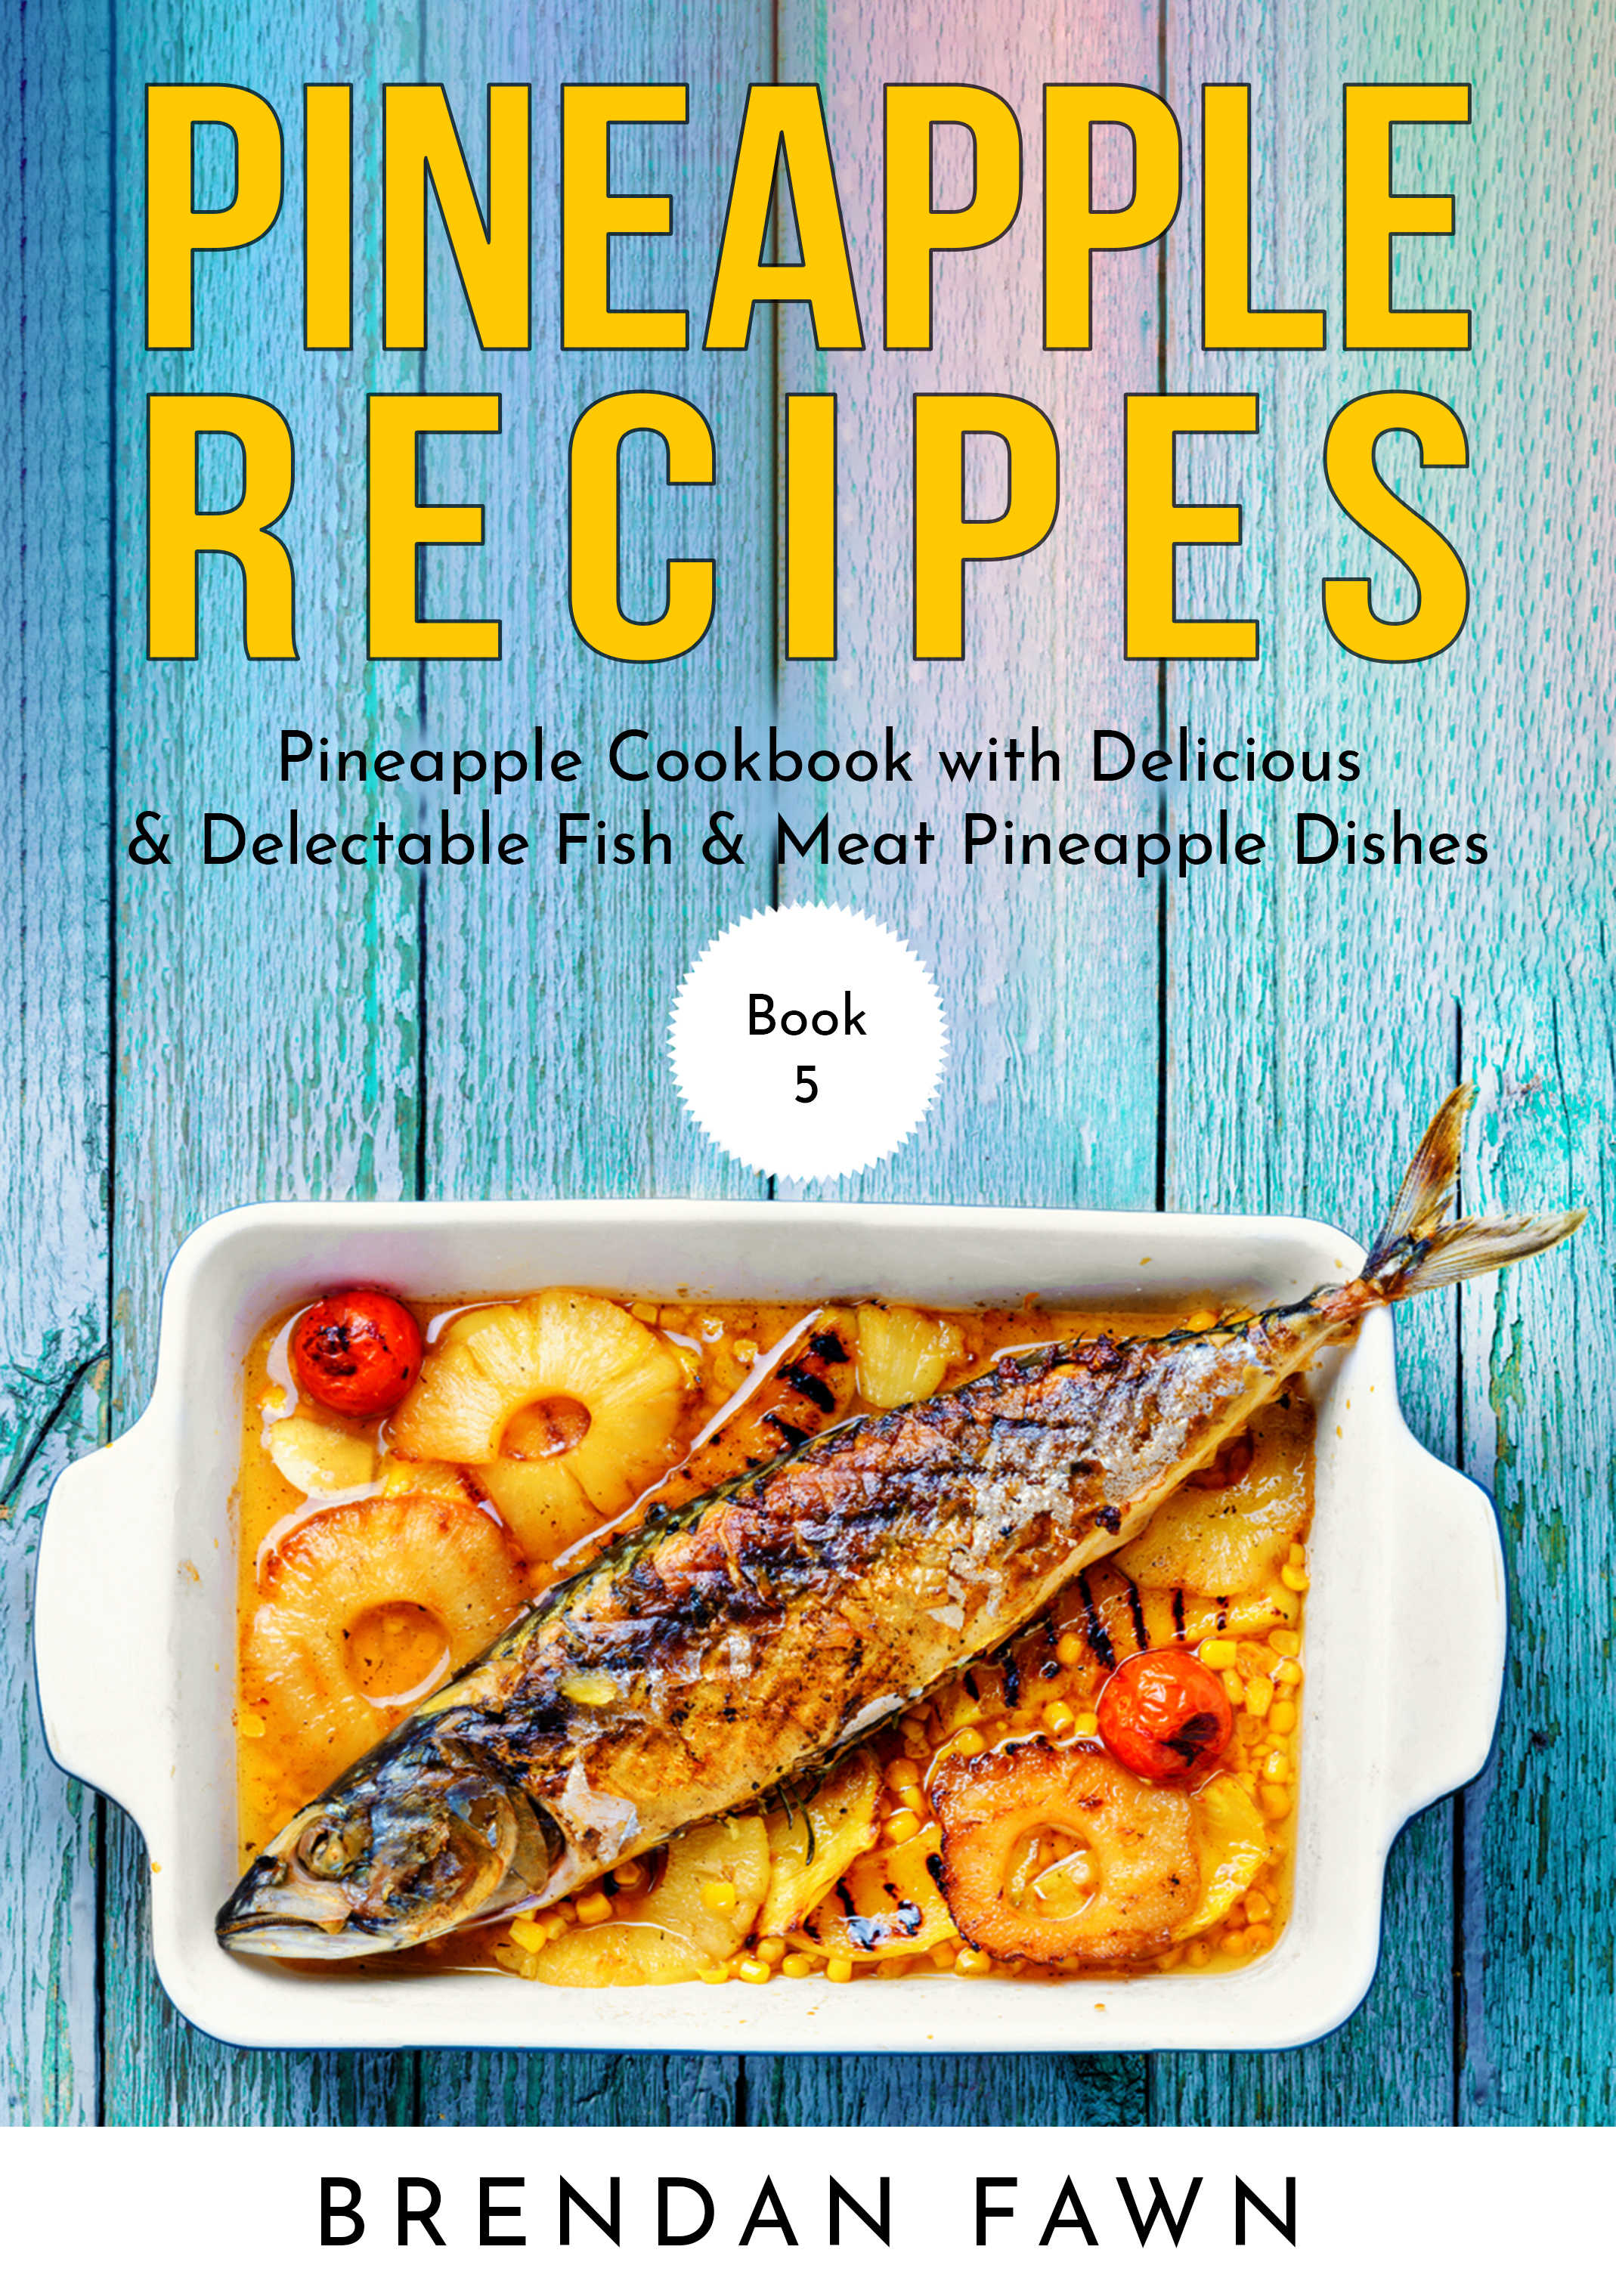 FREE: Pineapple Recipes: Pineapple Cookbook with Delicious & Delectable Fish & Meat Pineapple Dishes by Brendan Fawn